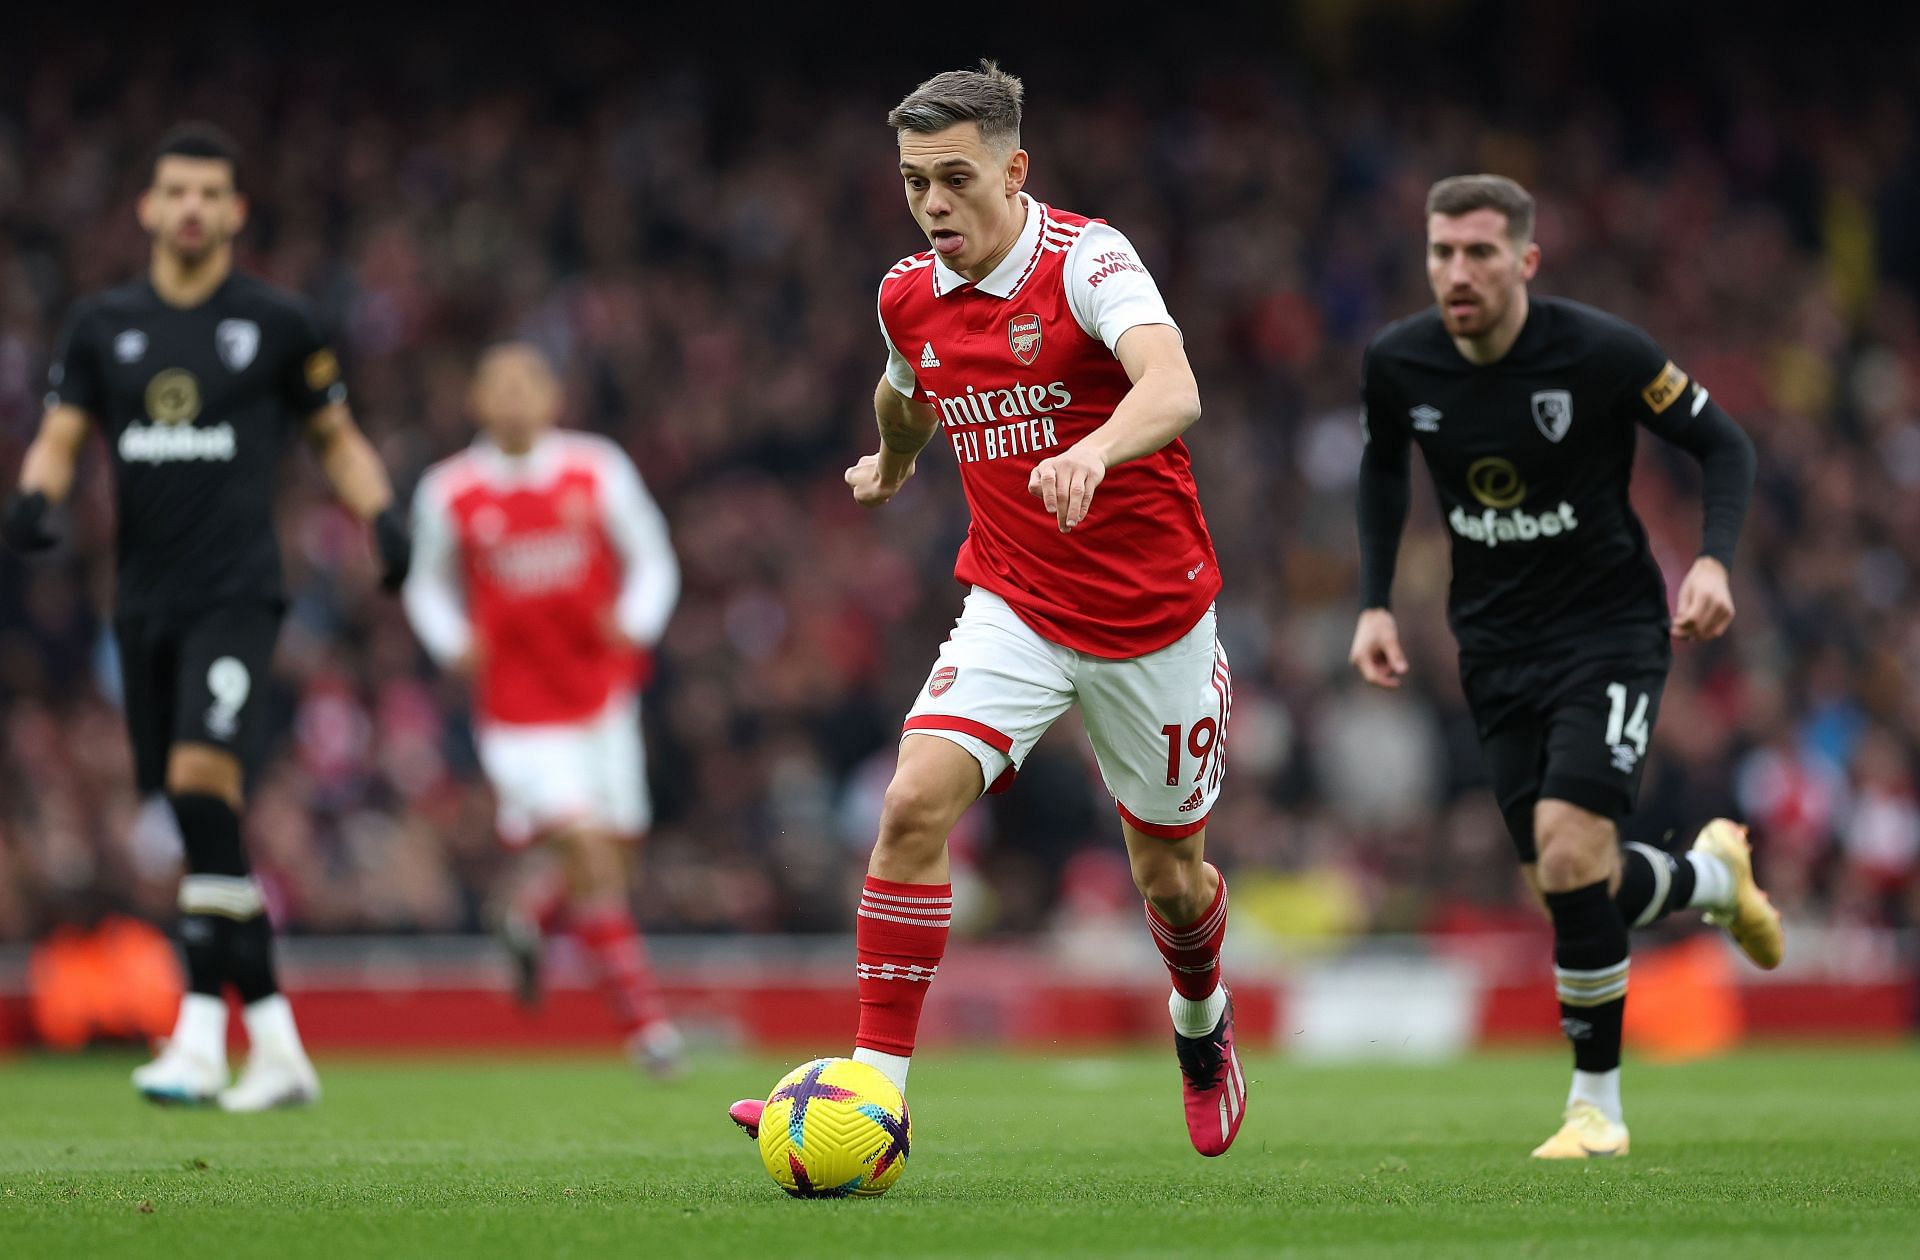 Leandro Trossard has settled in quite well at the Emirates.